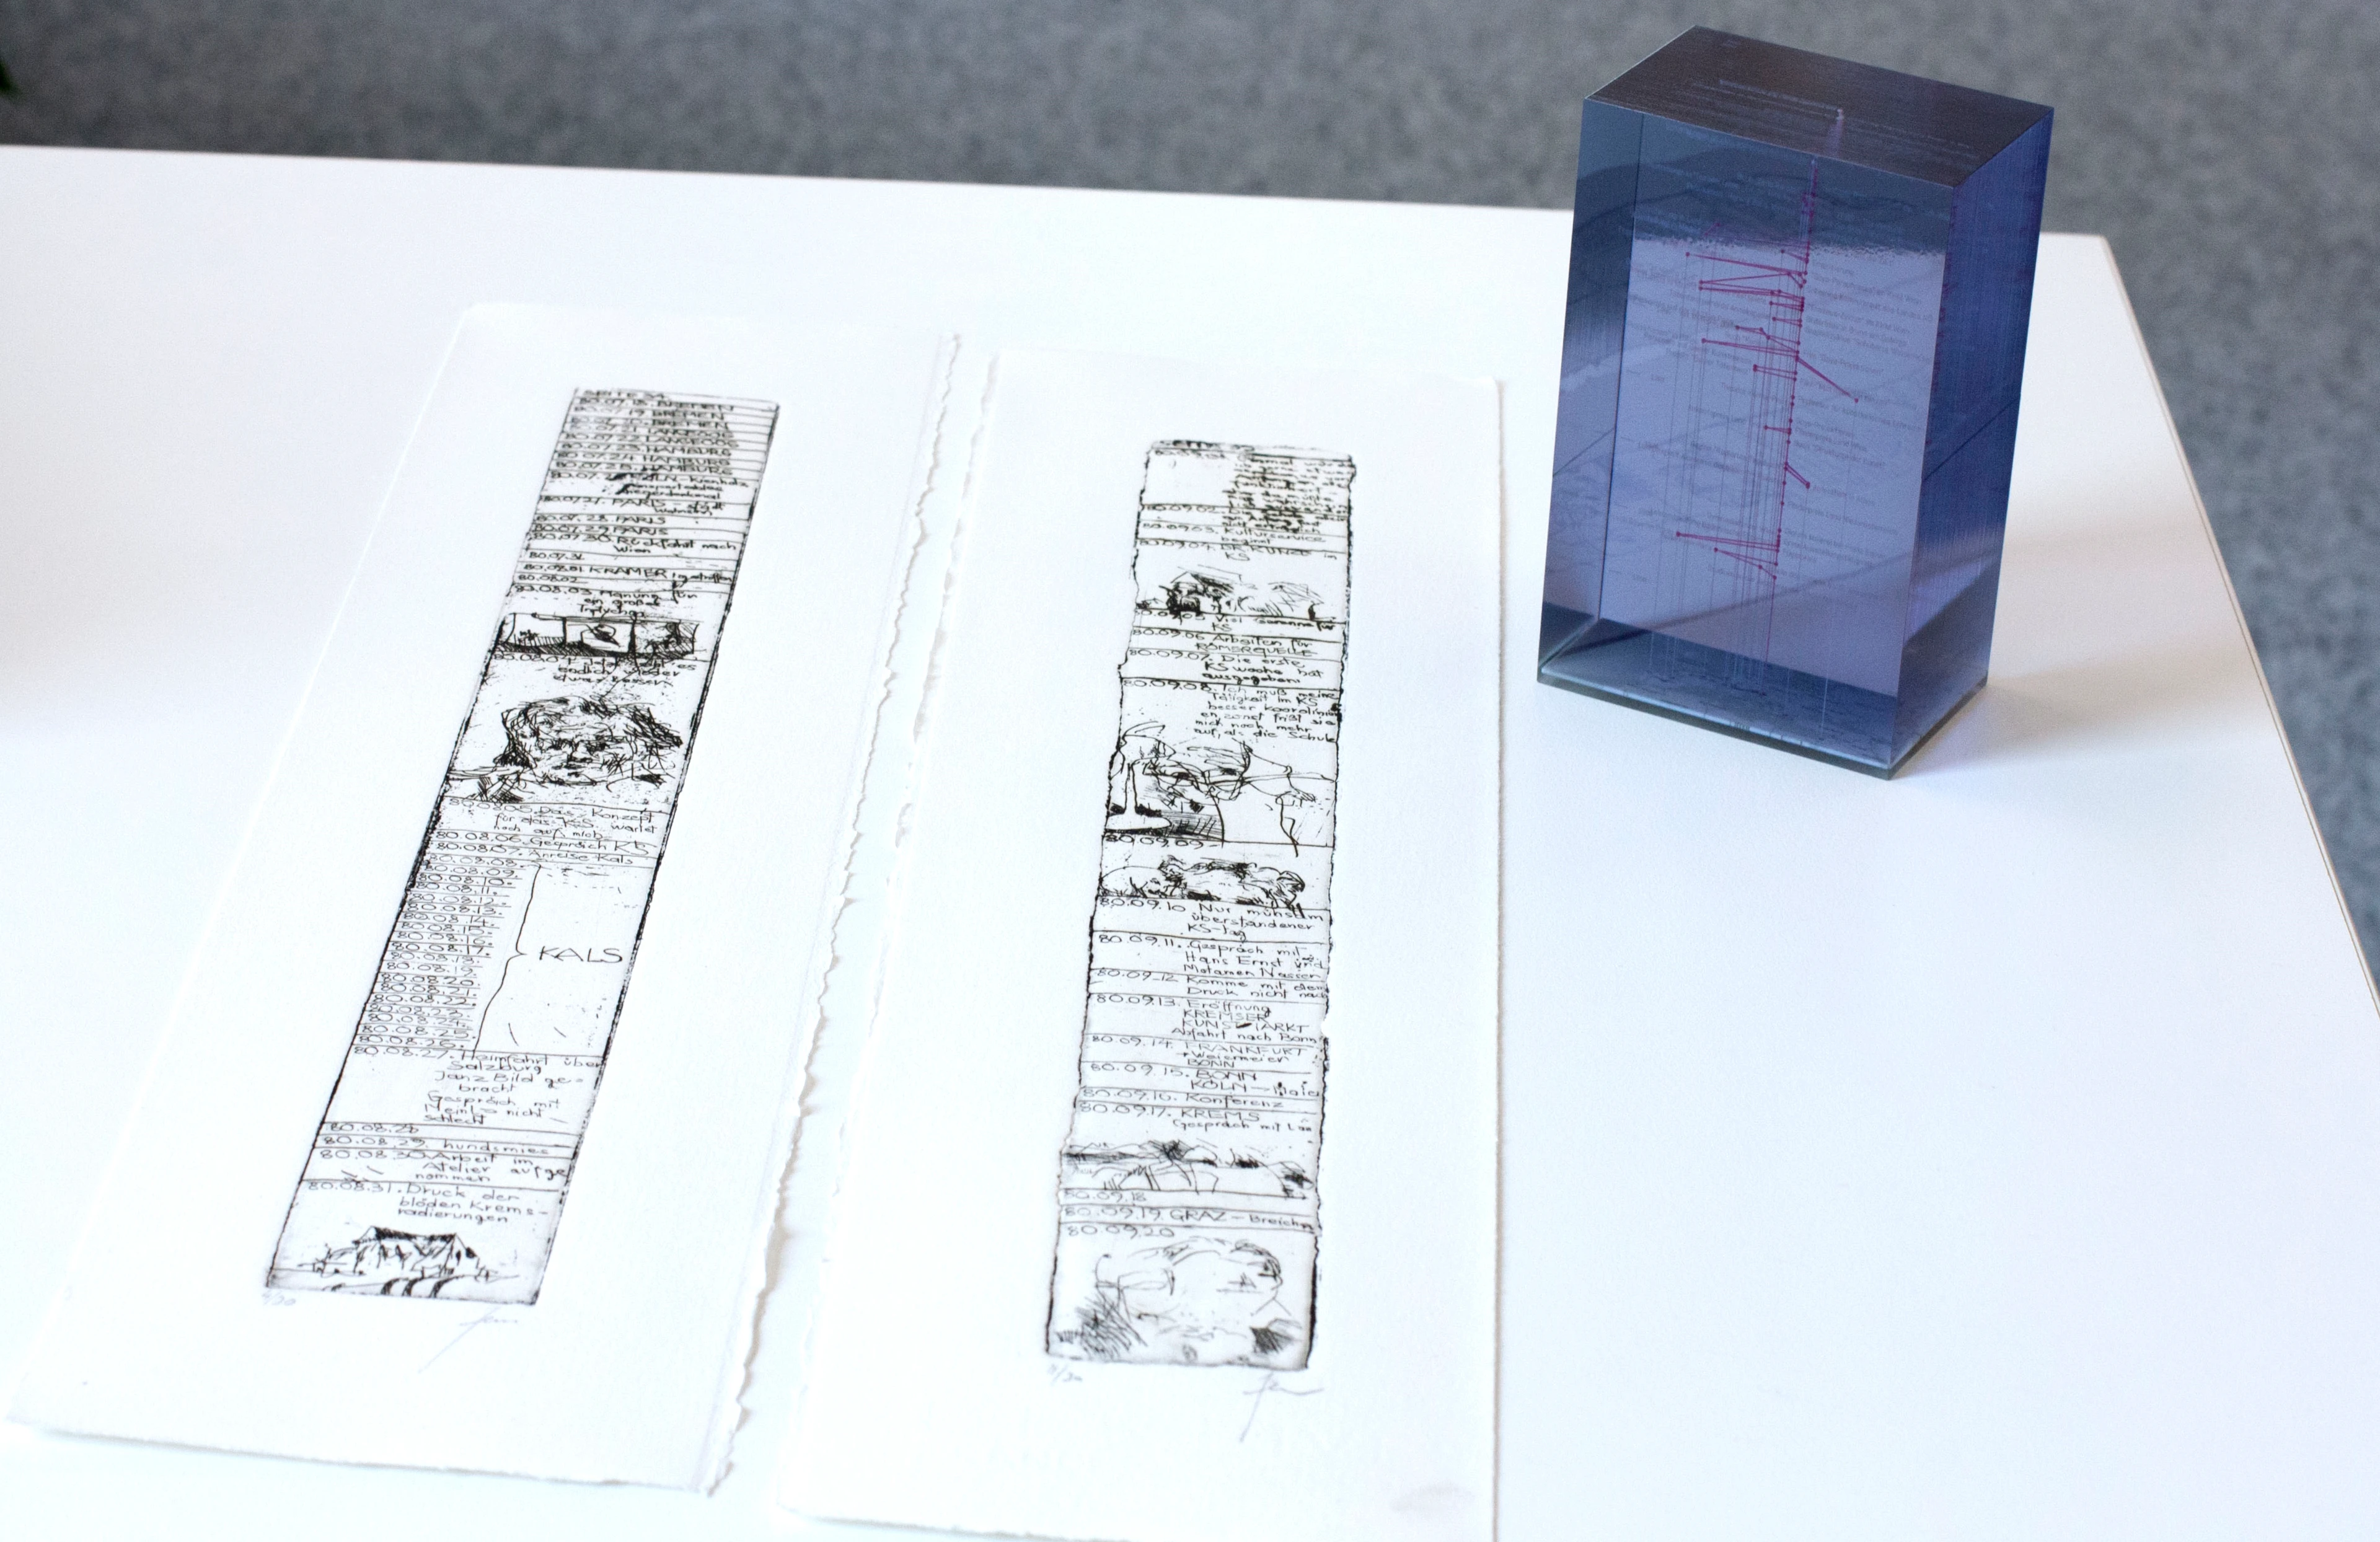 Data sculpture, next to original prints of the artist's etched copper plates.